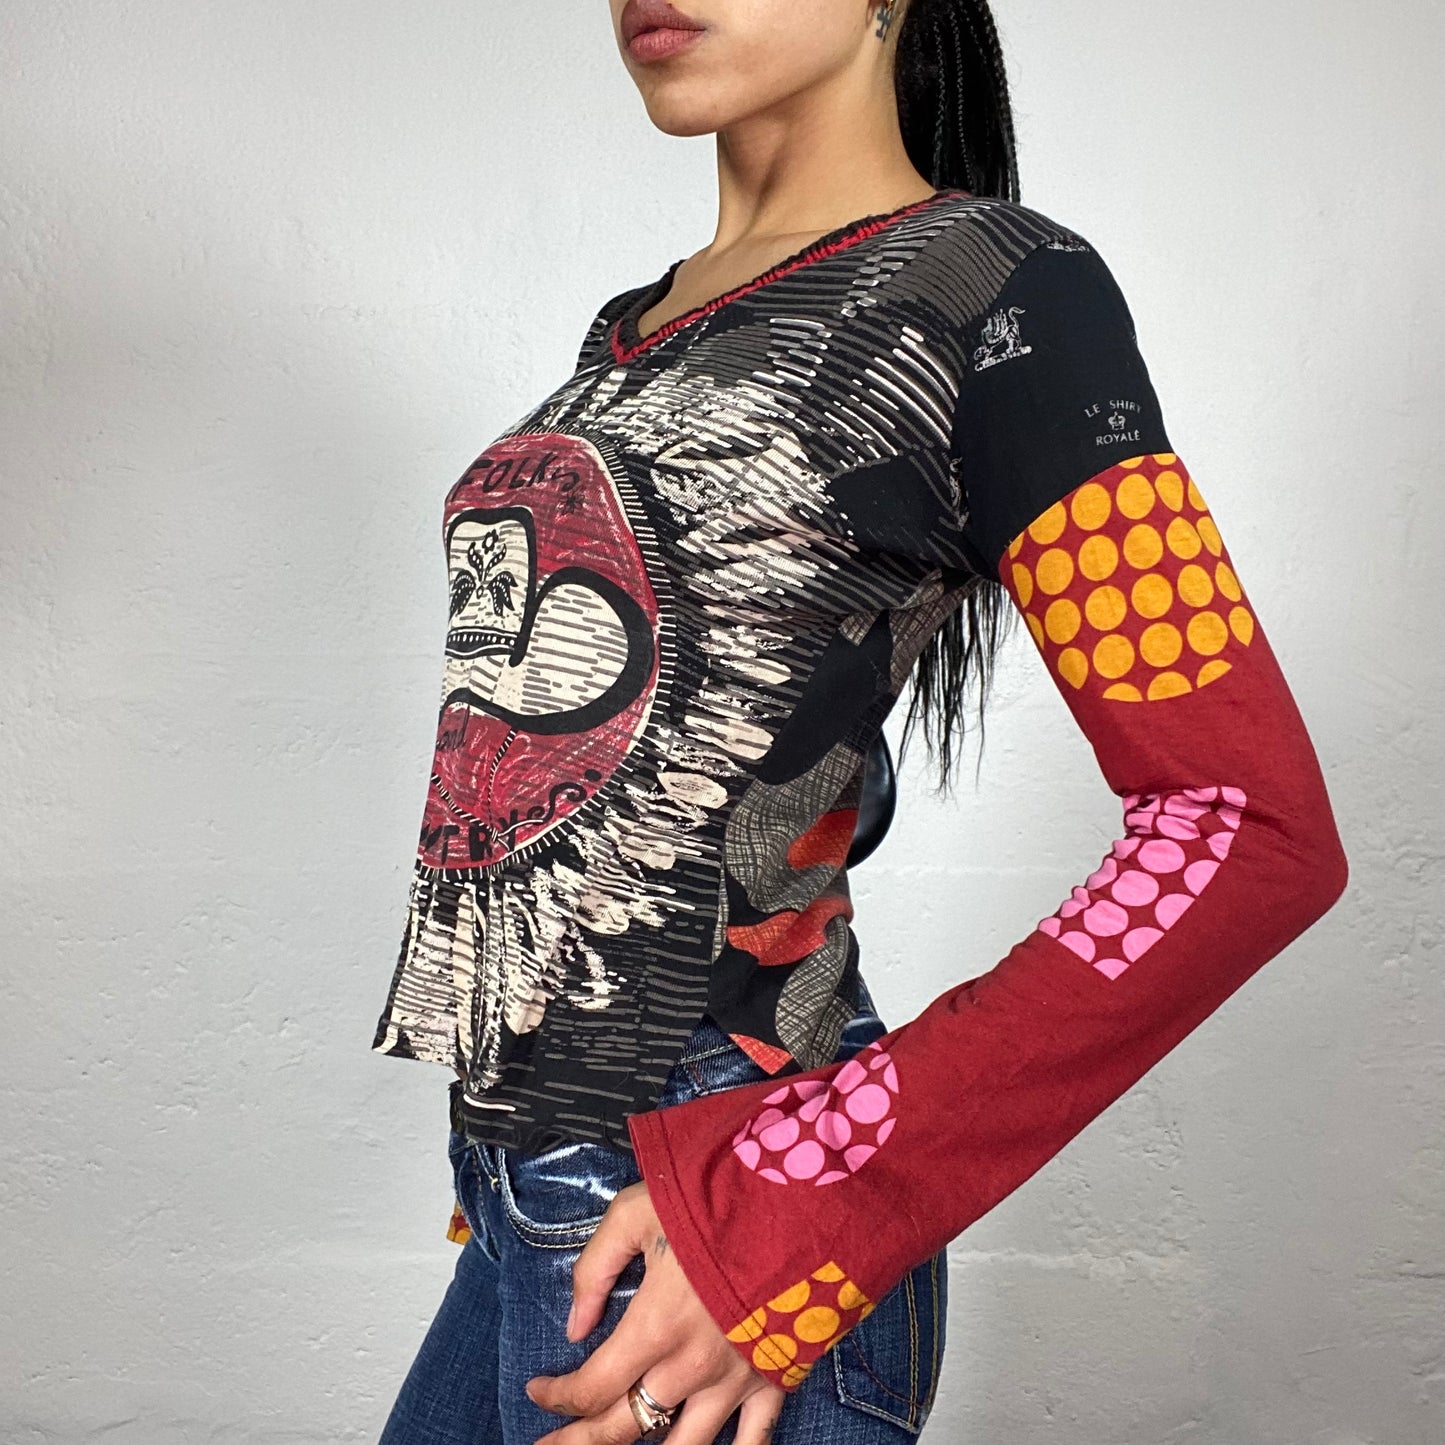 Vintage 2000's Grungy Multicoloured Black and Grey Printed Longsleeve Top (M/L)